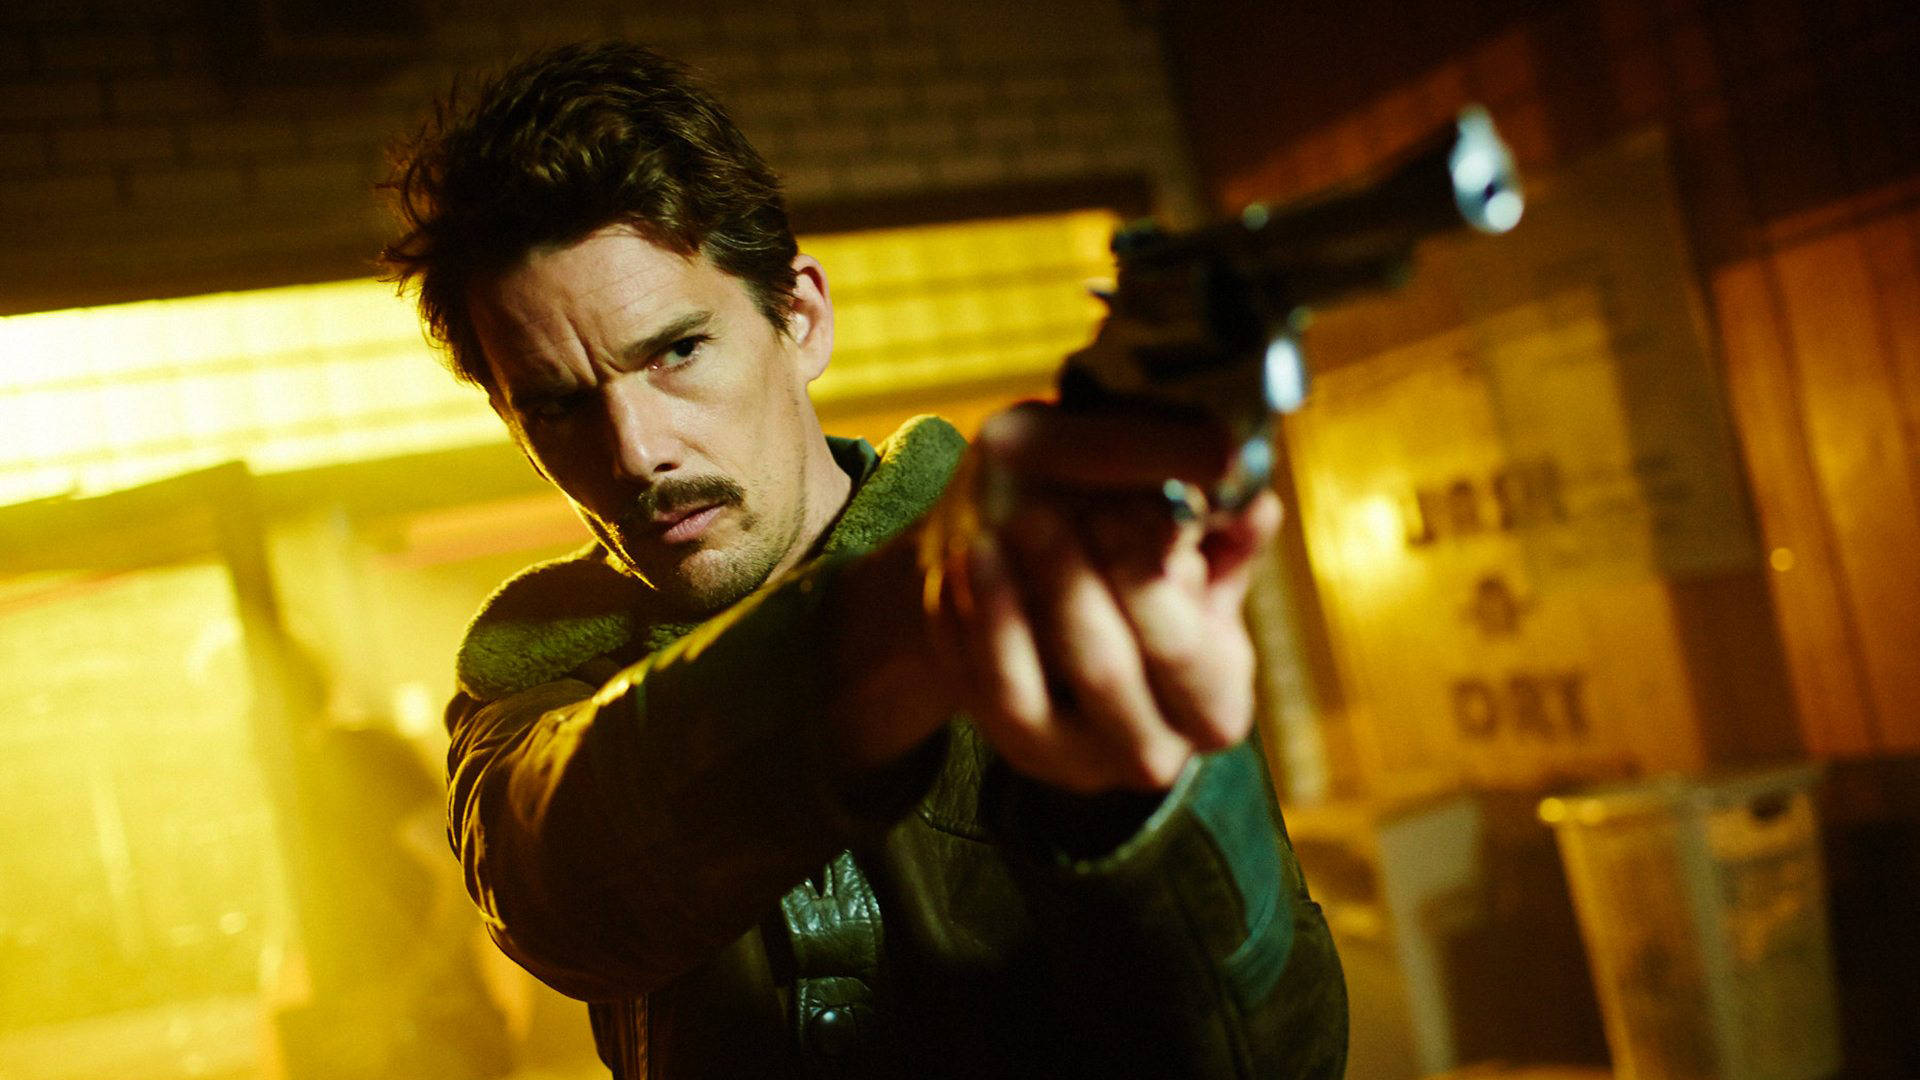 Ethan Hawke Action Movie Hollywood Wallpaper